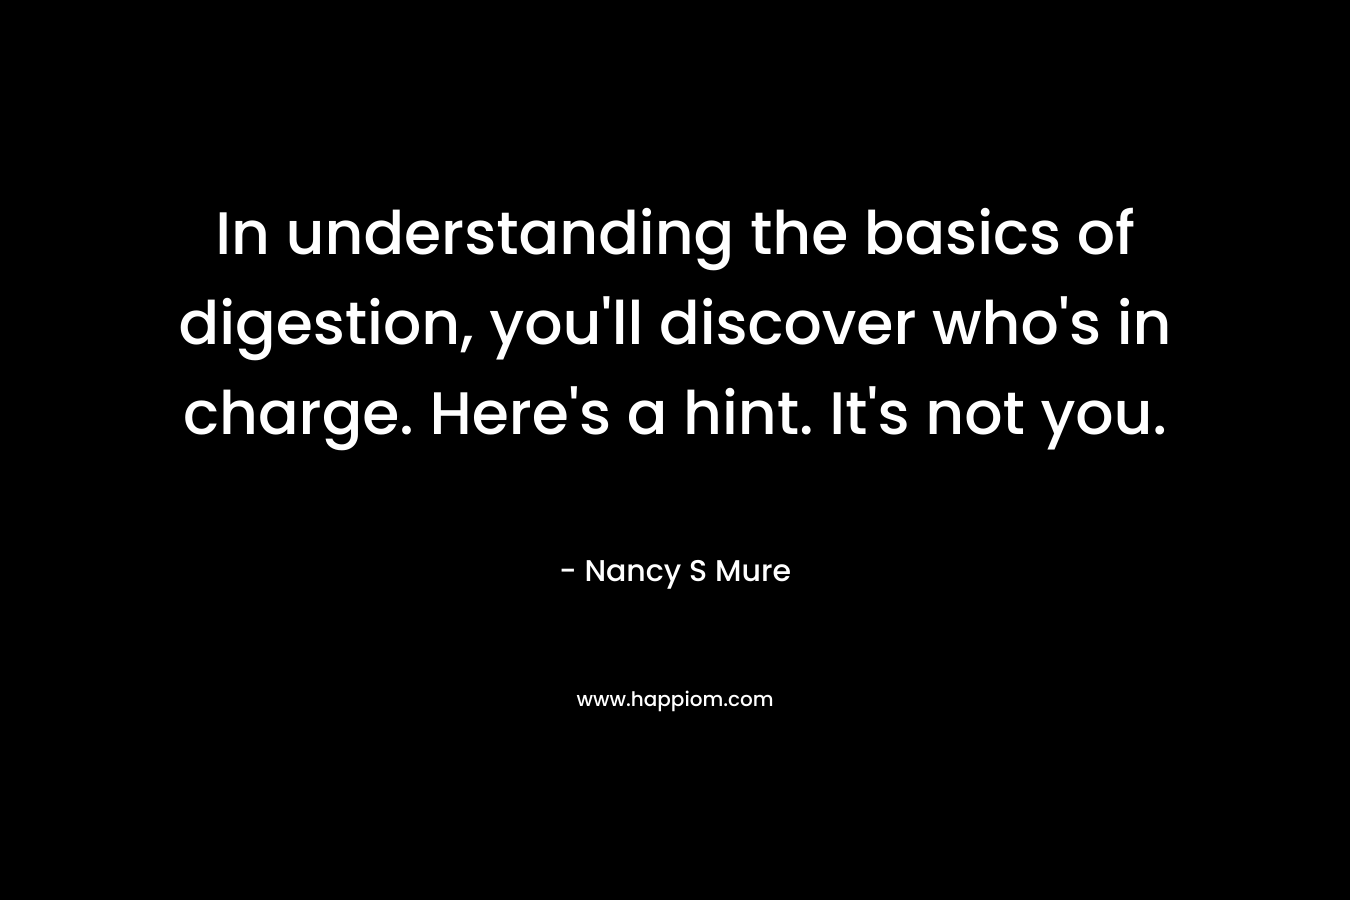 In understanding the basics of digestion, you’ll discover who’s in charge. Here’s a hint. It’s not you. – Nancy S Mure